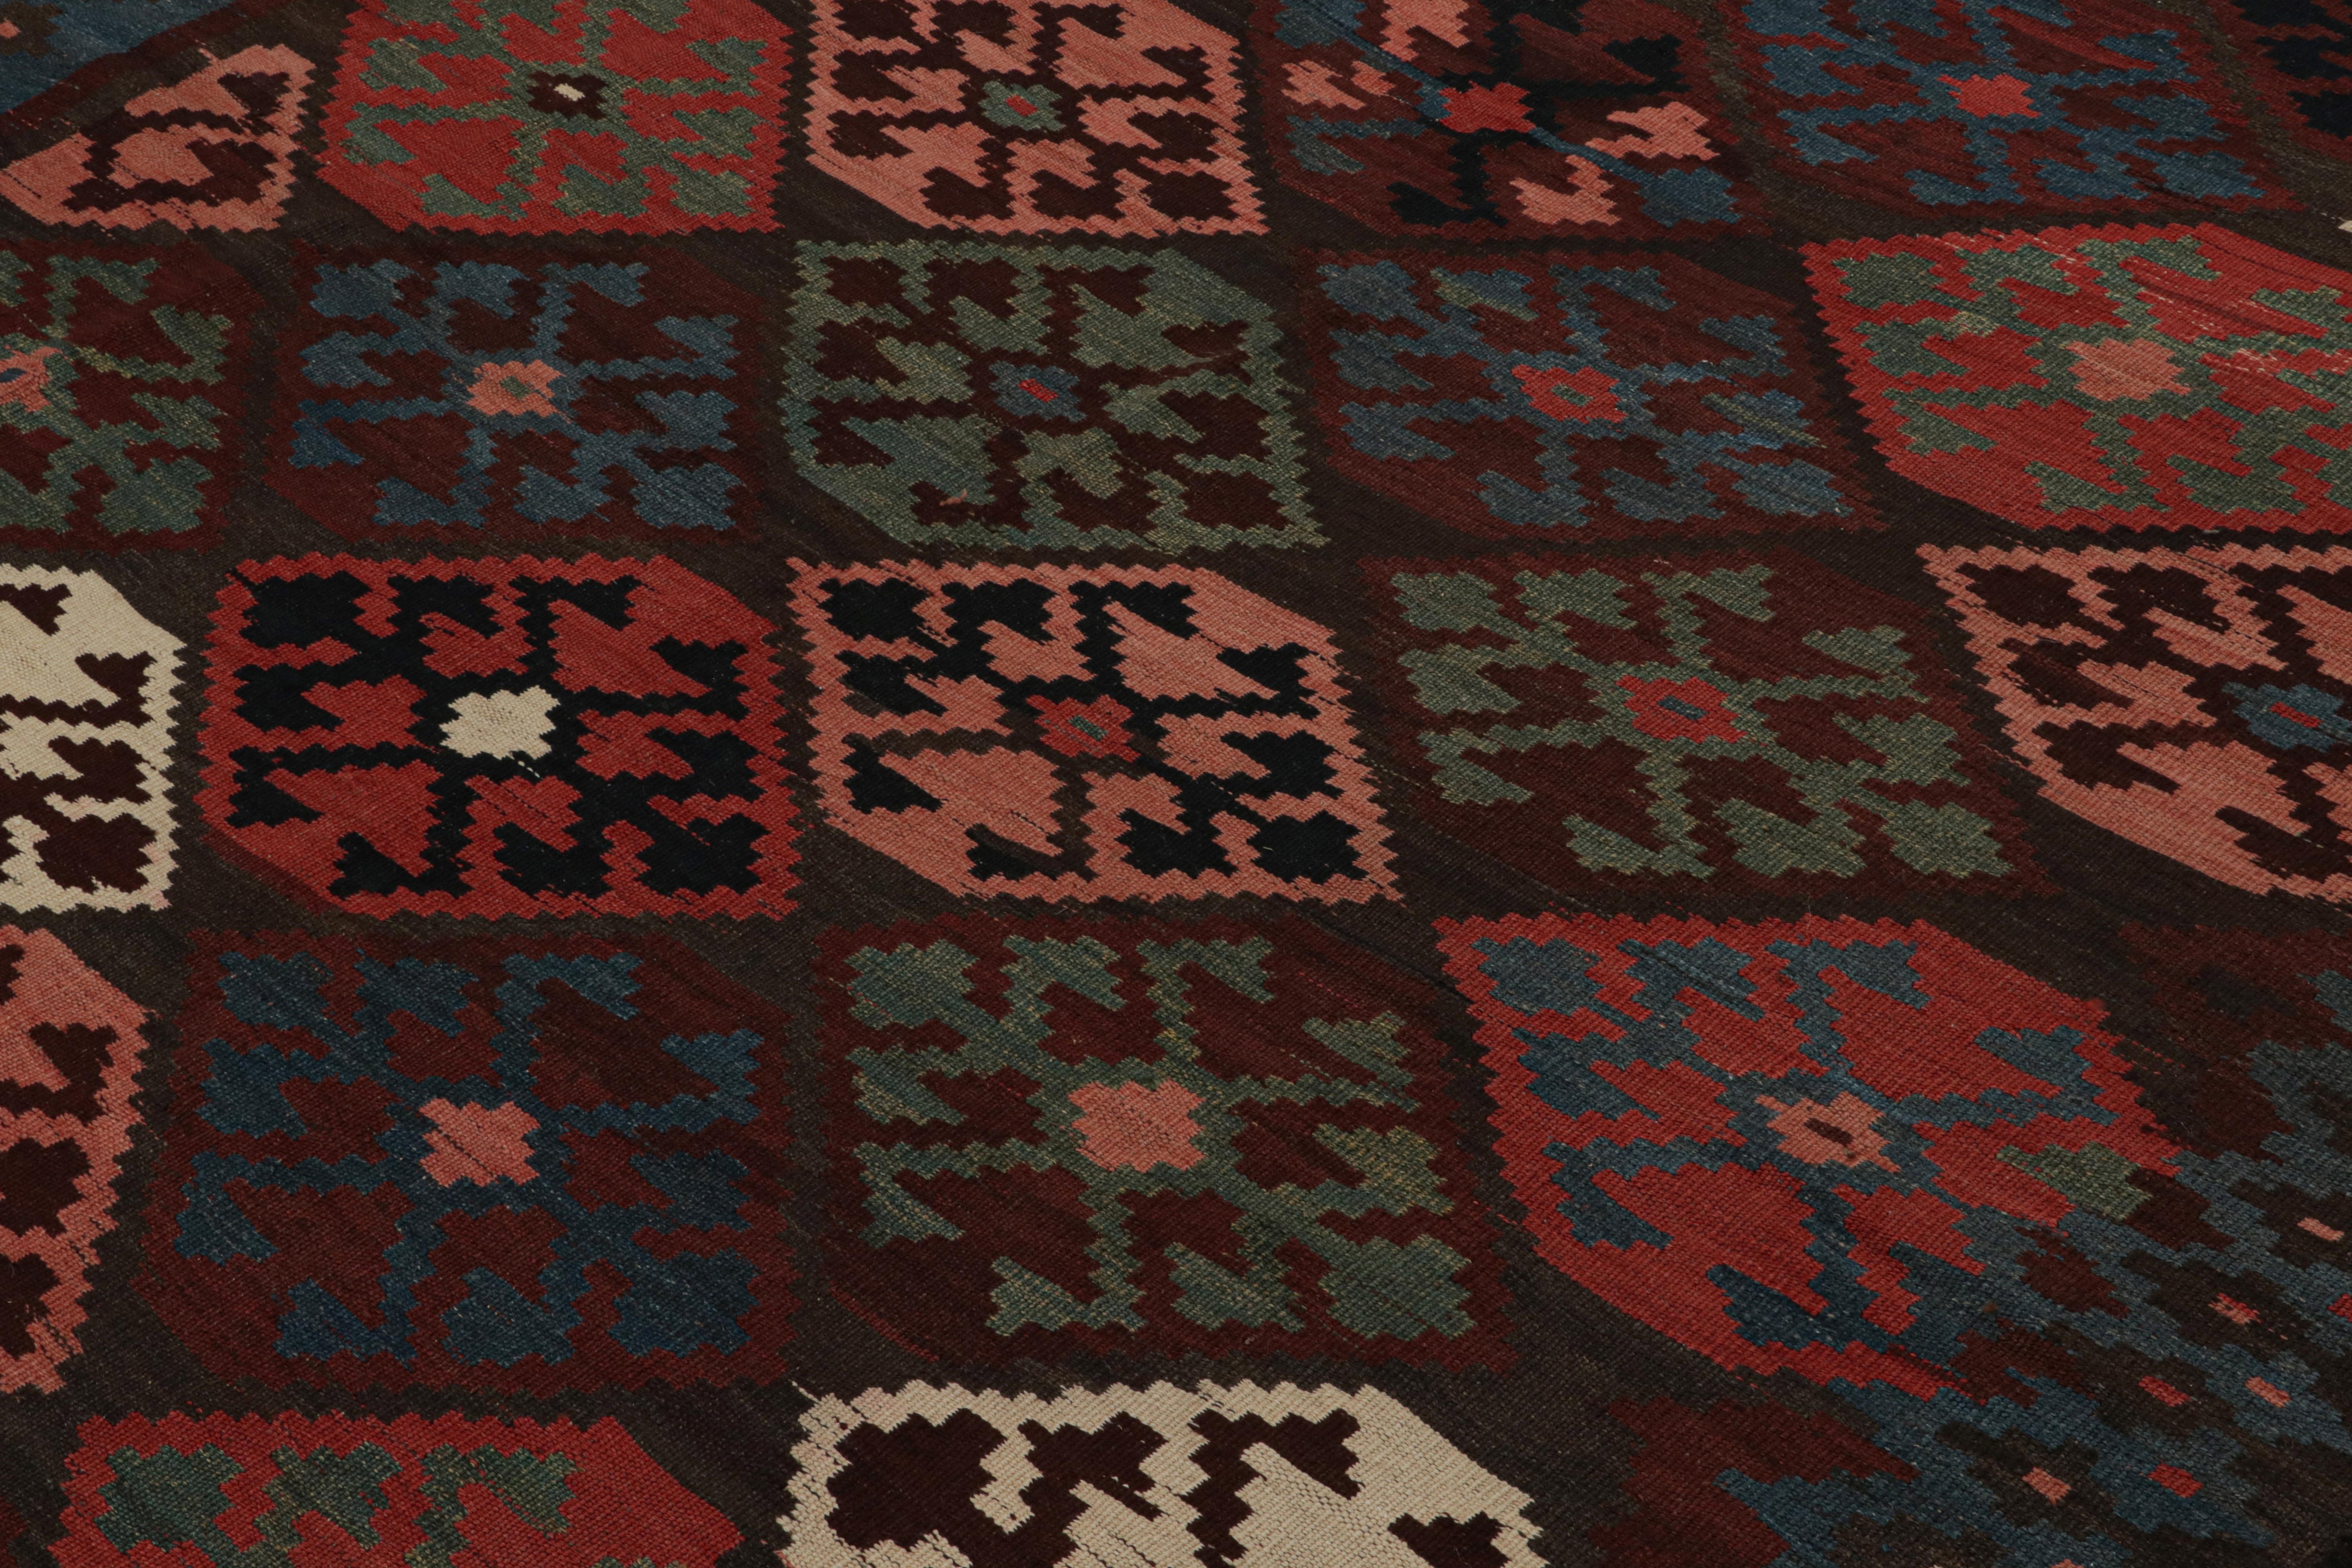 Hand-Woven Vintage Tribal Kilim in Red, Blue-Brown Geometric Patterns, from Rug & Kilim For Sale